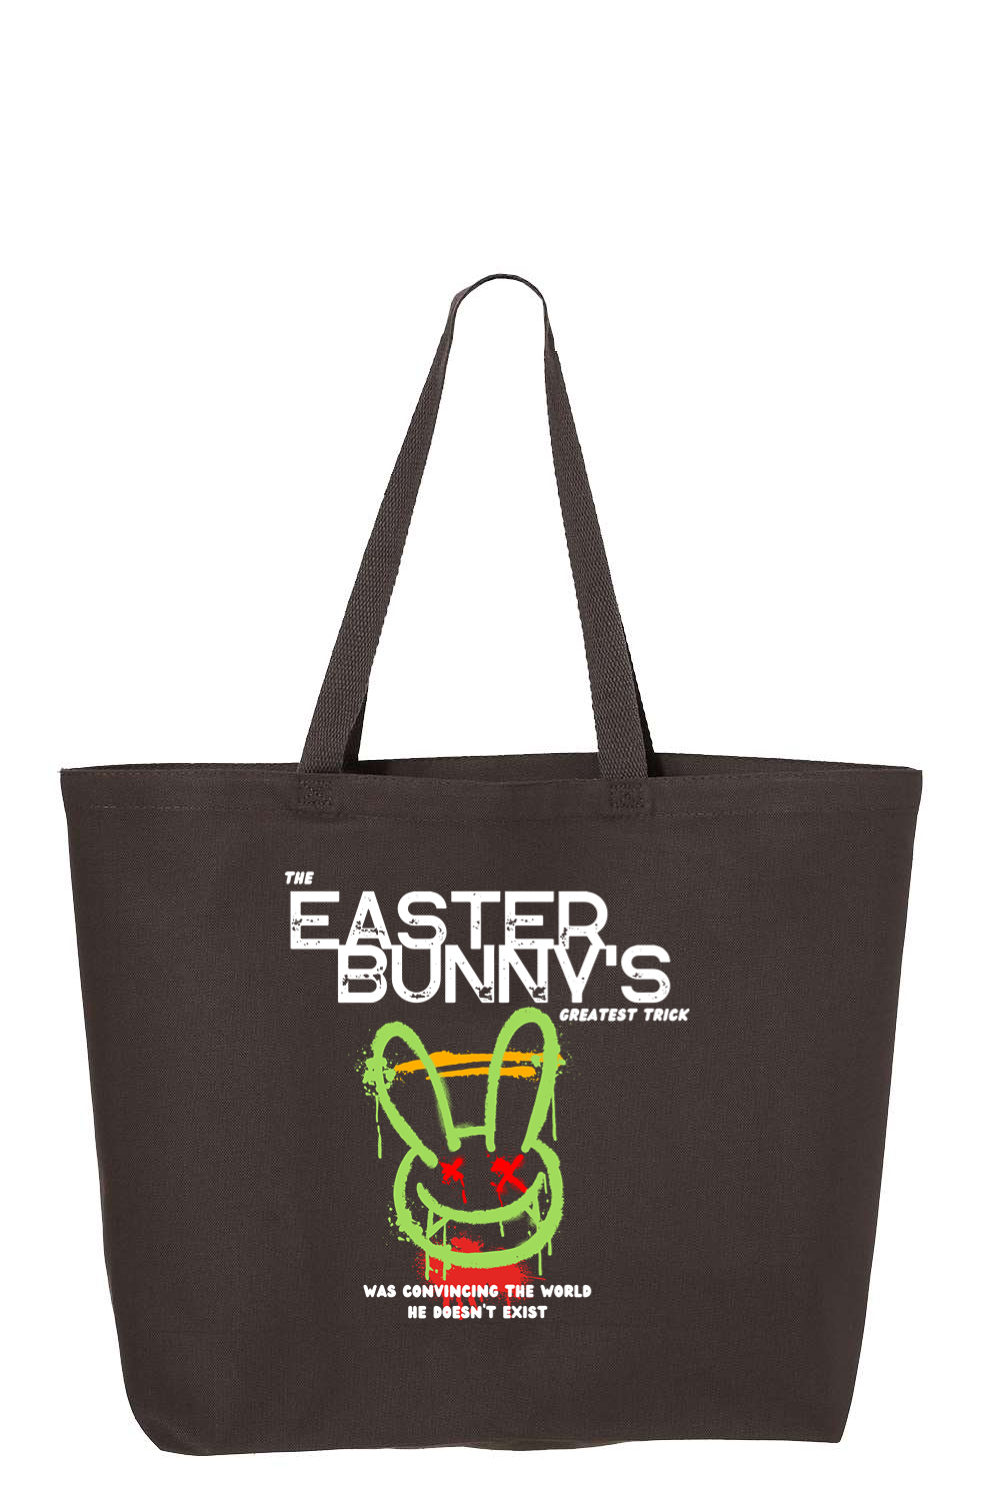 The Easter Bunny's Greatest Trick Paint Jumbo Tote